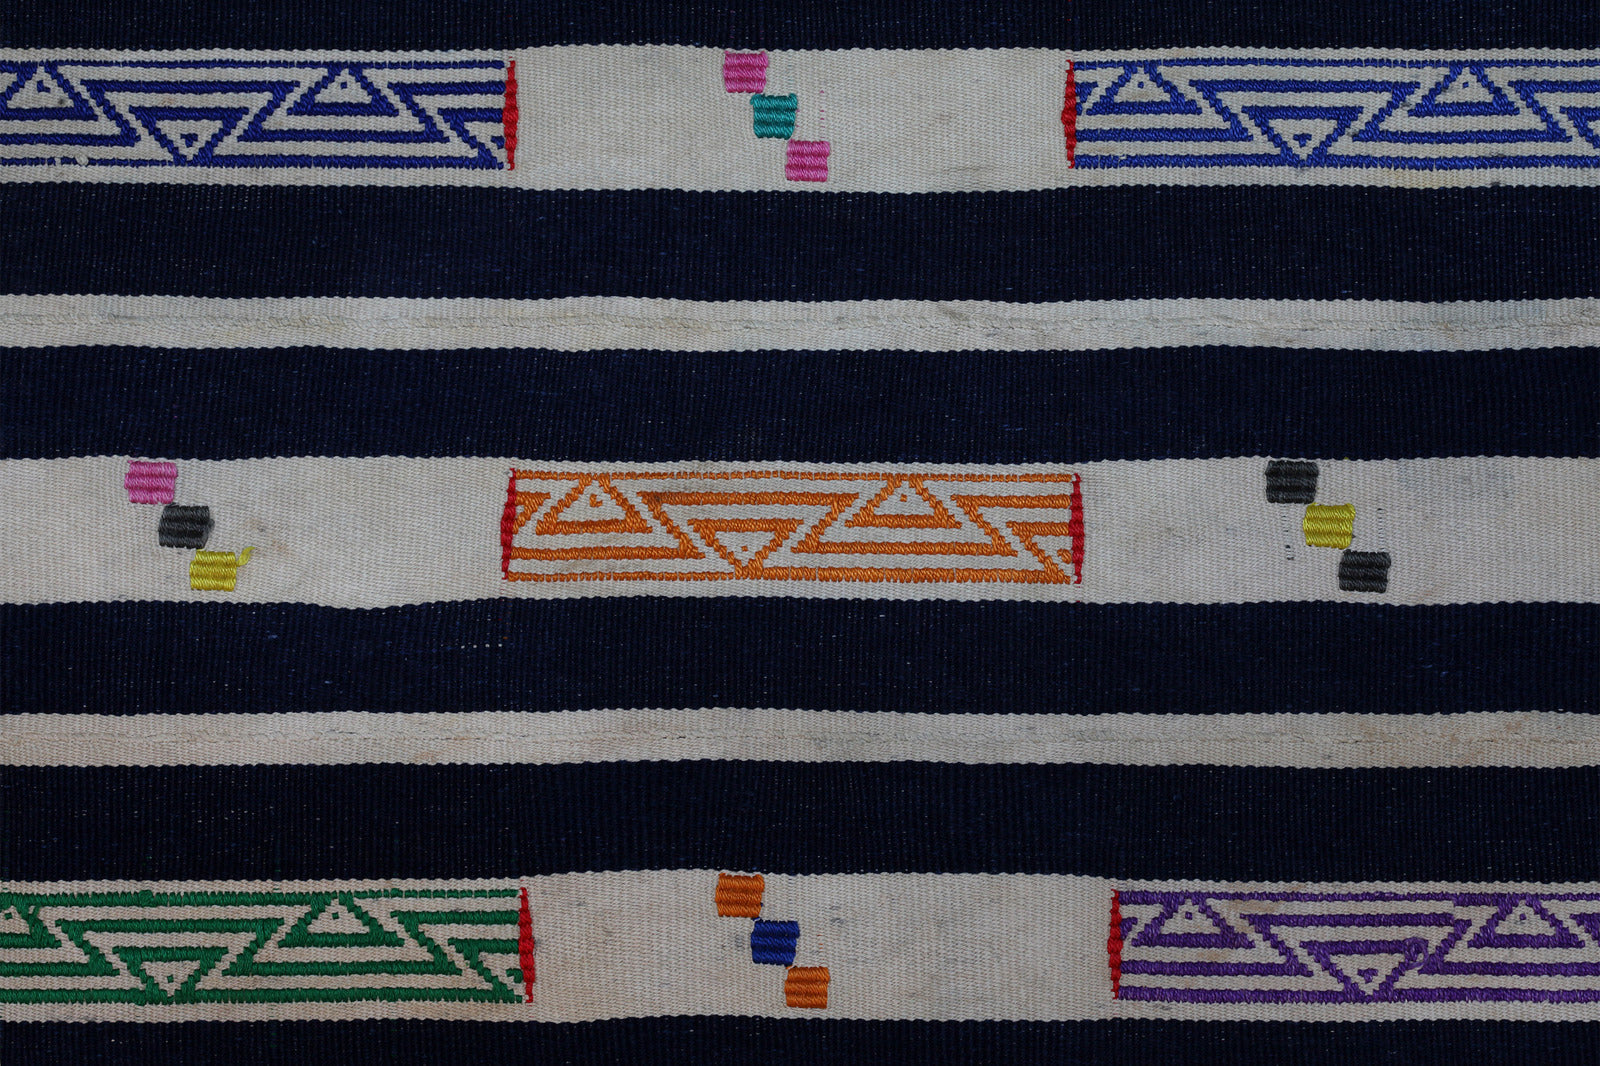 Tribal Textiles - African Tribal Textiles - Tradition - Centuries - Vibrant Colors - Intricate Patterns - Cultural History - Special Occasions - Prized Piece - Any Collector -  Bring traditional African style to your home decor with this Cotton Wrap-Ikat Cloth, handwoven by the Baule Tribe of the Ivory Coast. This beautiful, unique cloth measures 53